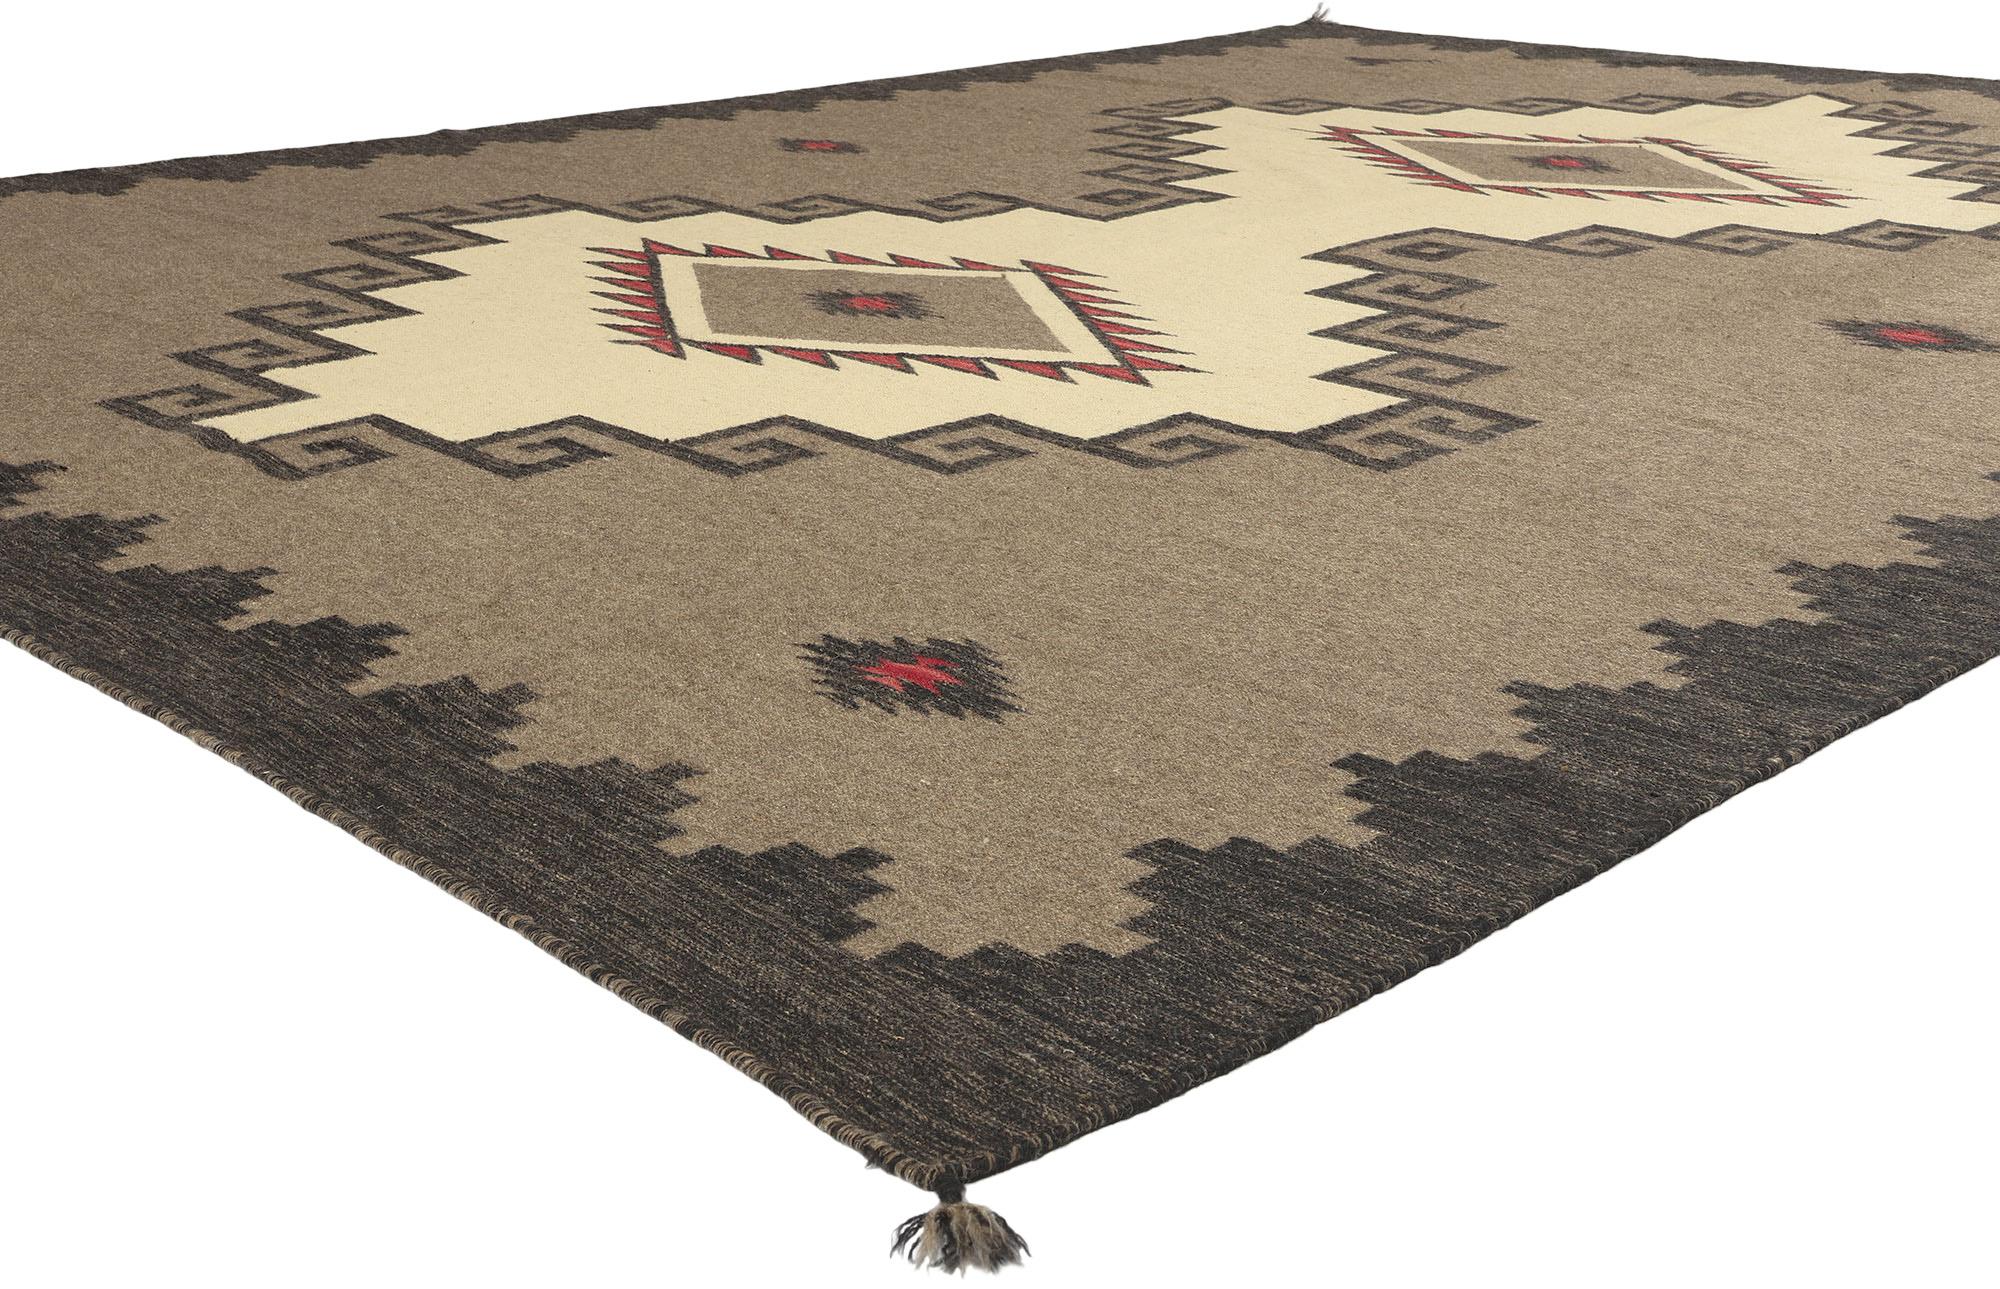 81022 Southwest Modern Ganado Navajo-Style Rug, 08'11 x 11'11. Immerse your space in the essence of Southwest Modern aesthetics with this handwoven wool Ganado Navajo-style rug—a testament to the seamless blend of Contemporary Santa Fe and Native